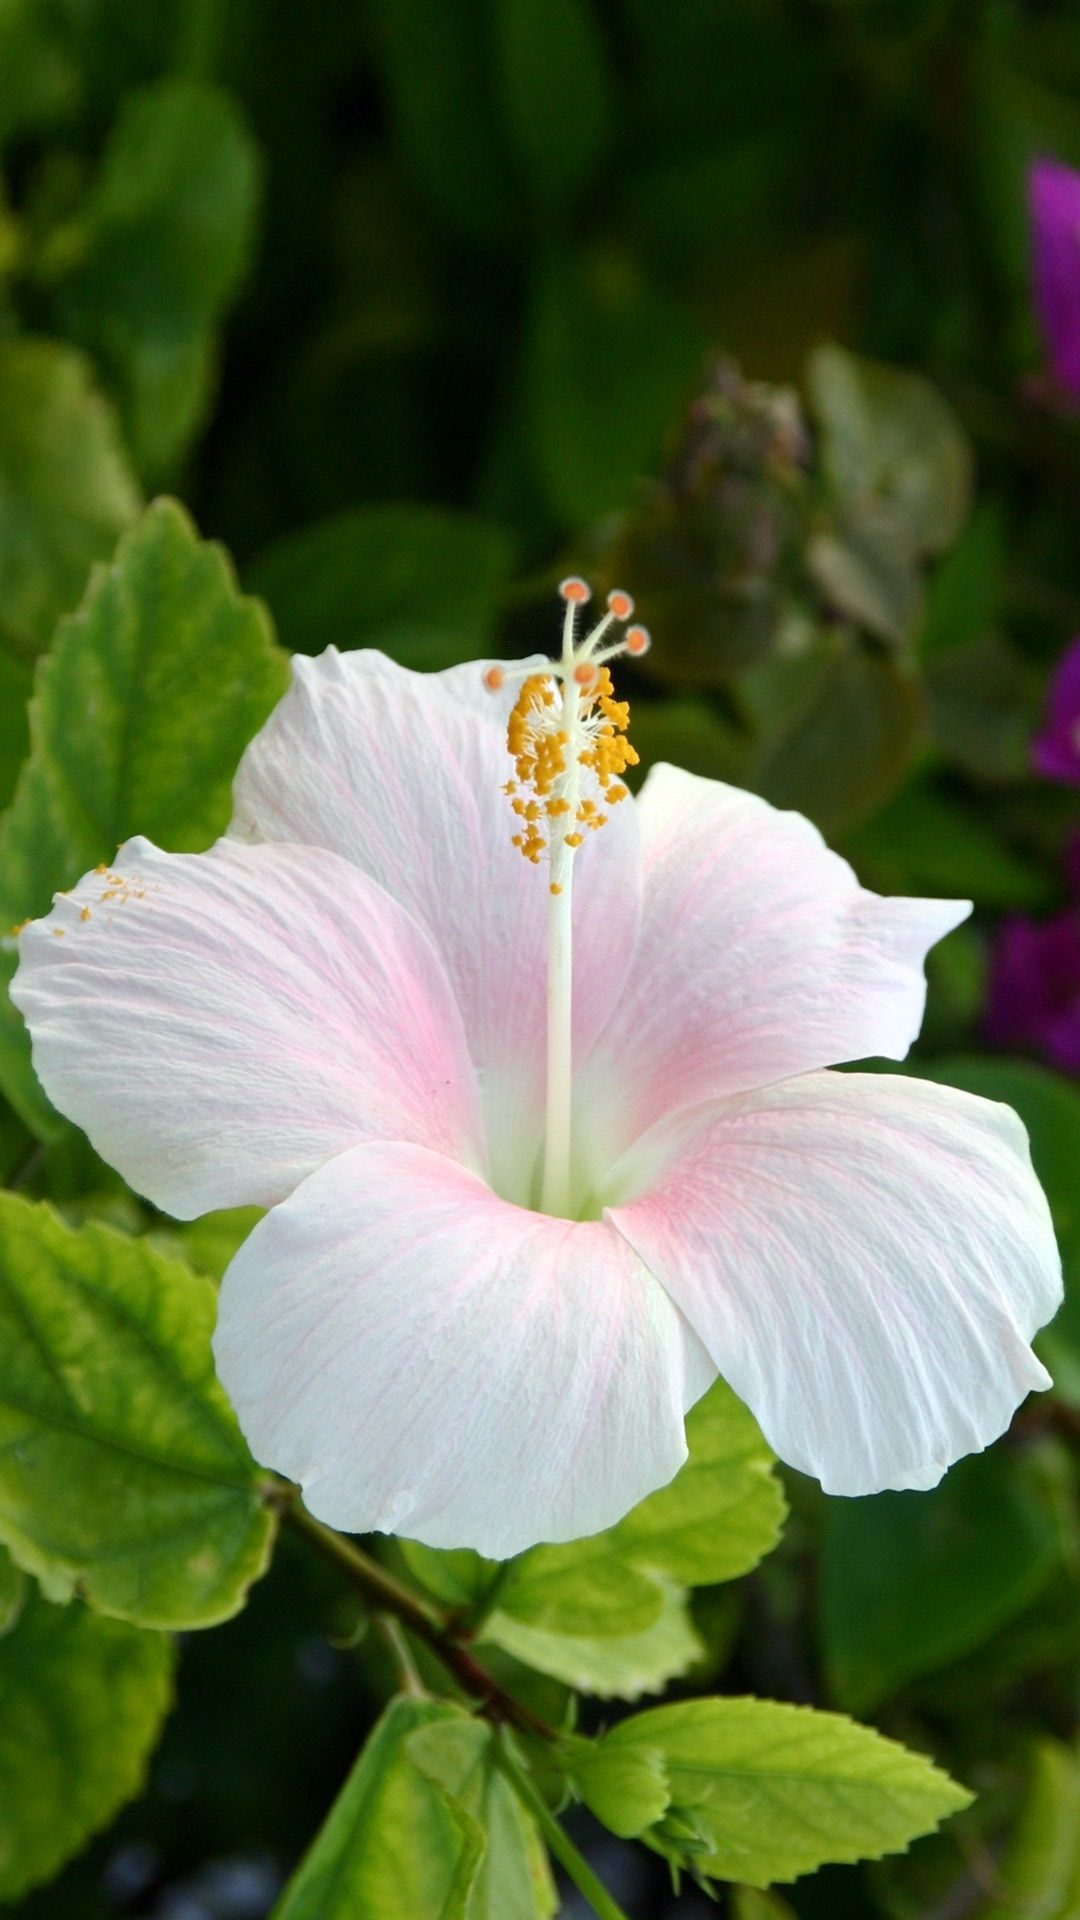 How To Care For Hibiscus Plants | Hibiscus, Hibiscus flowers and Flower